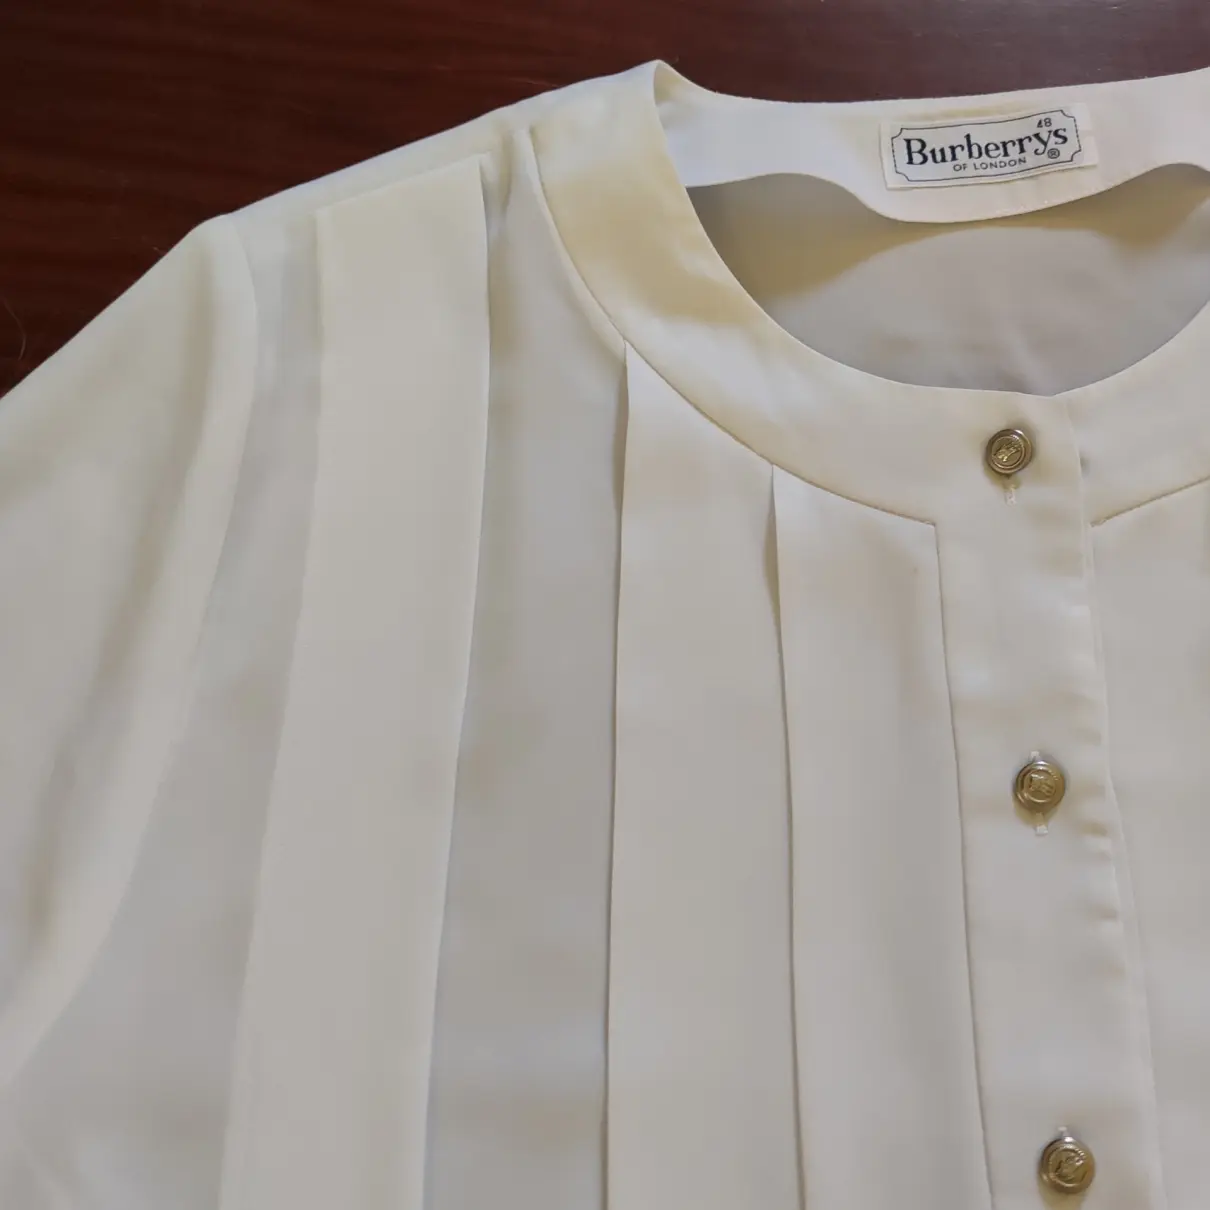 White Polyester Top Burberry - Vintage